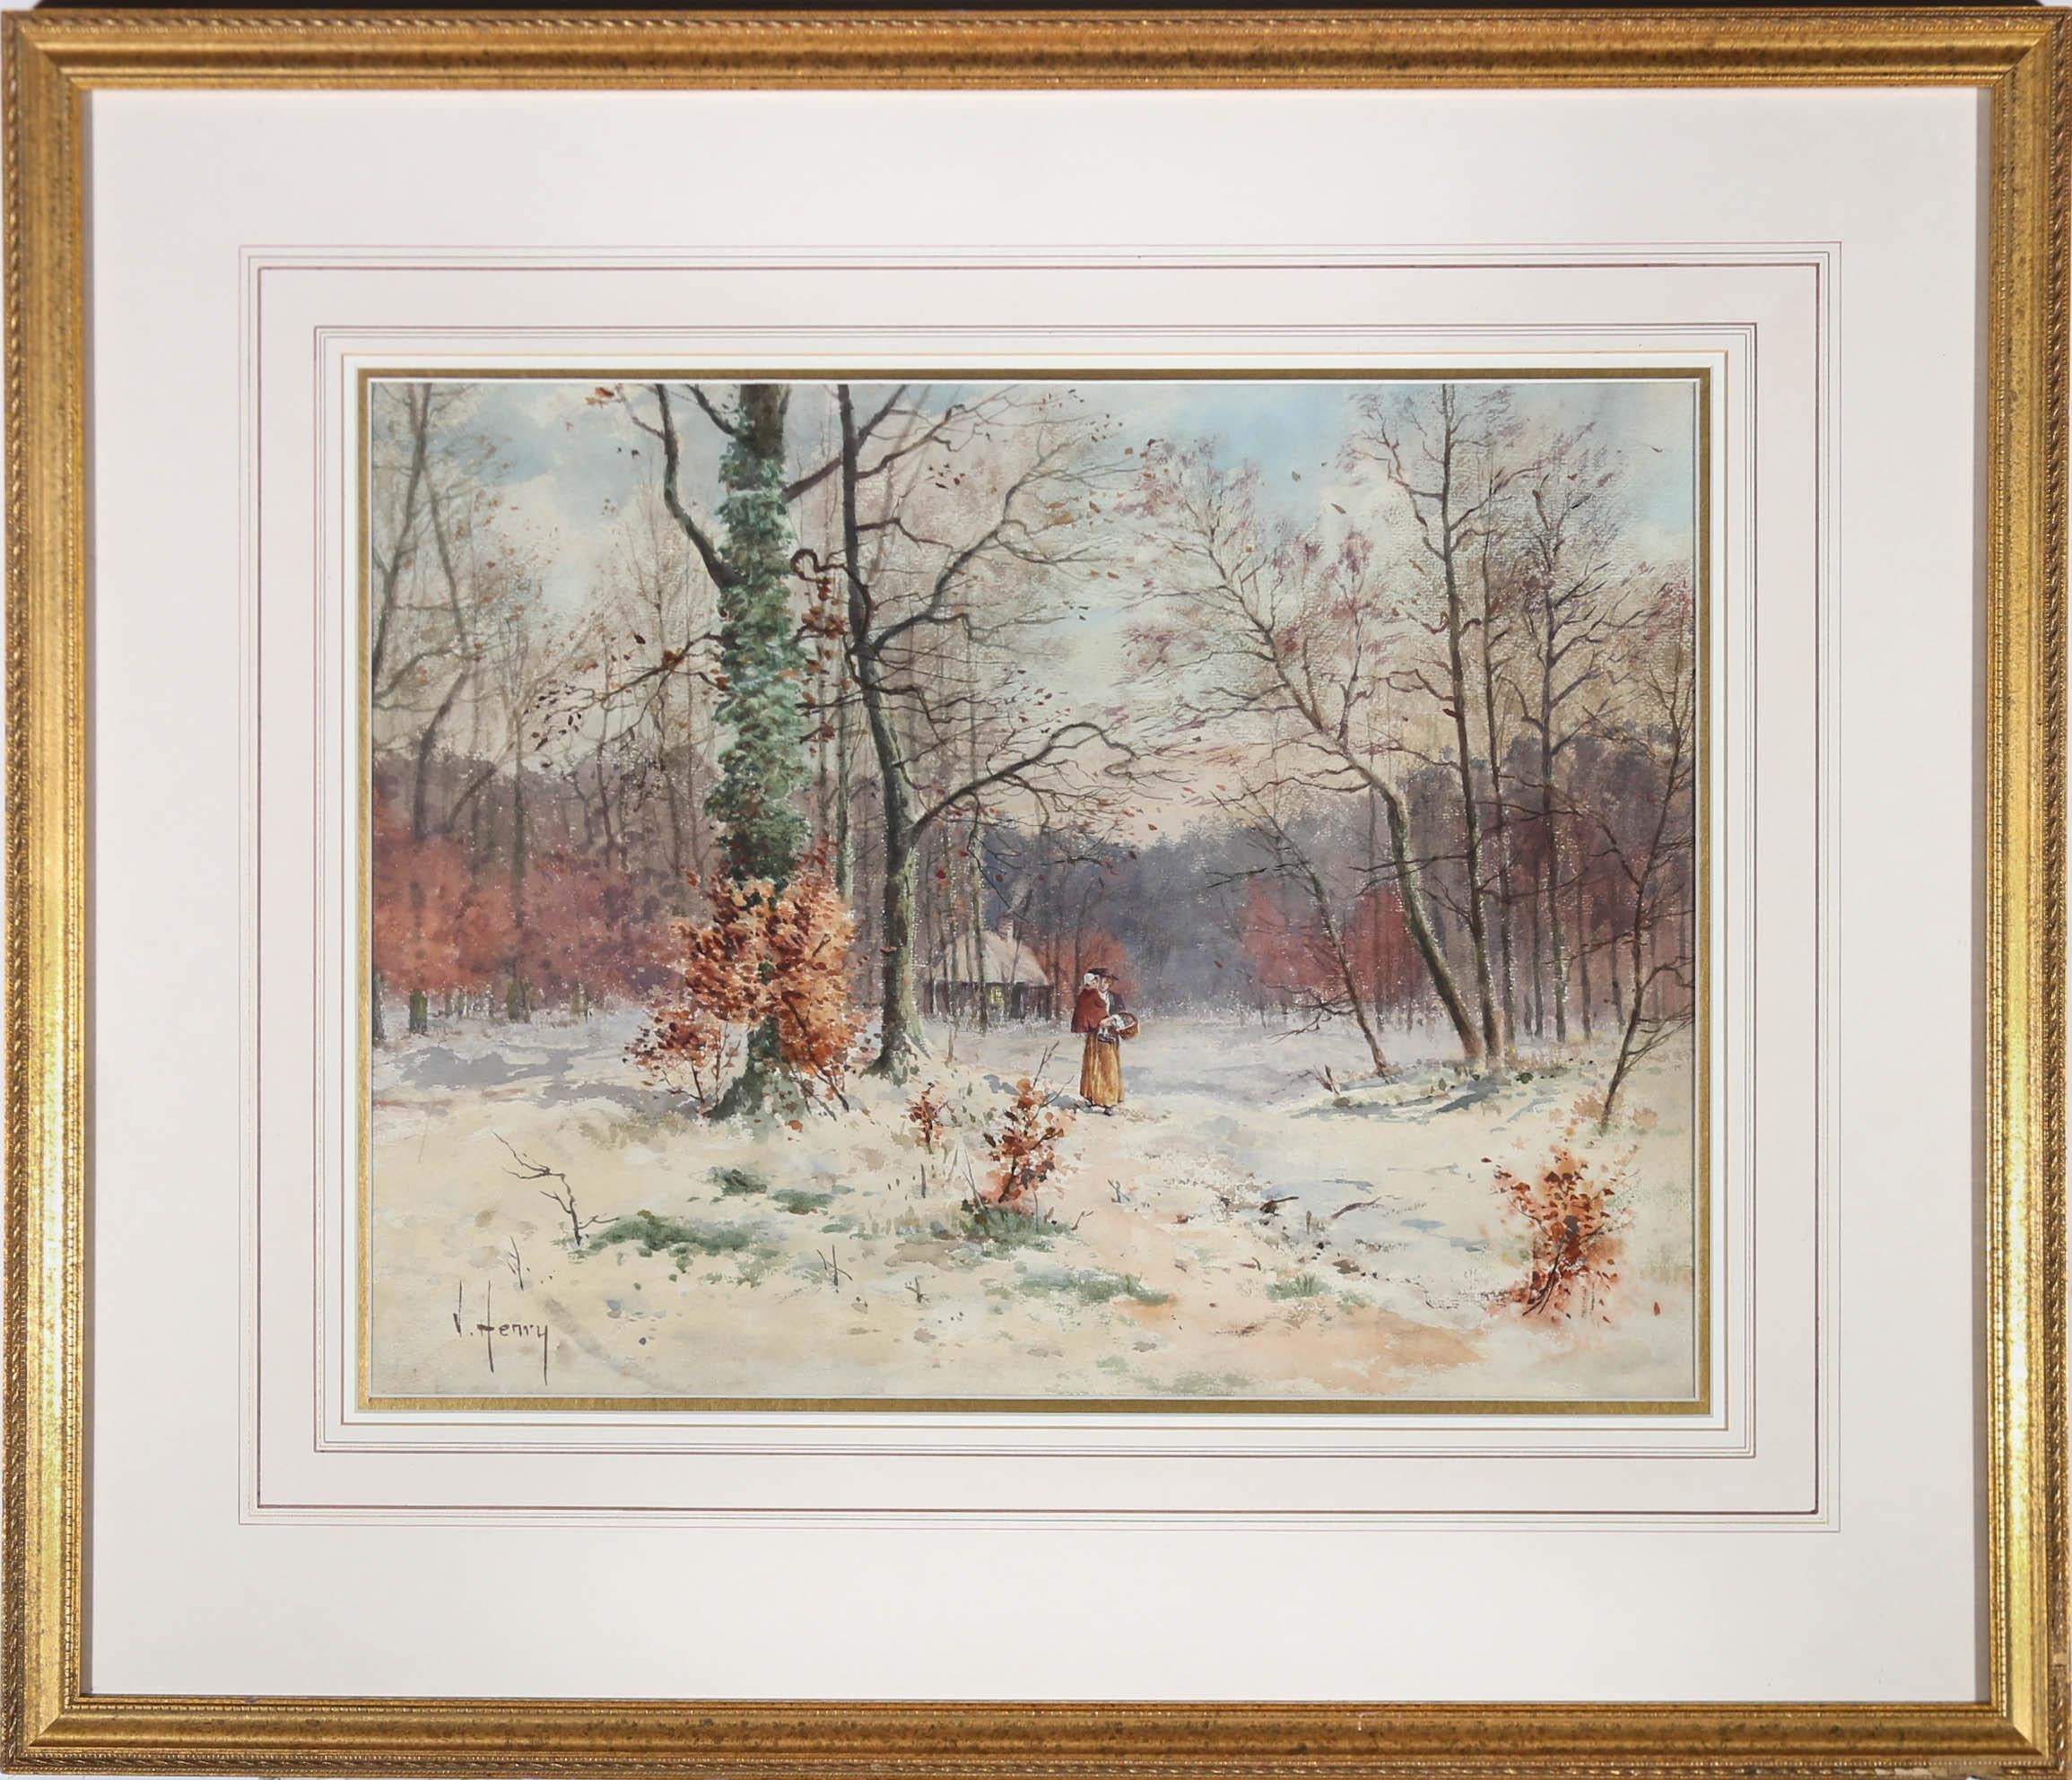 Setting off on a morning errand, this delicate watercolour depicts a mother and child walking through woodland on a winter's day. In the background sits the gamekeeper's cottage, cosy and warm with a smoking fire. The watercolour has been signed by